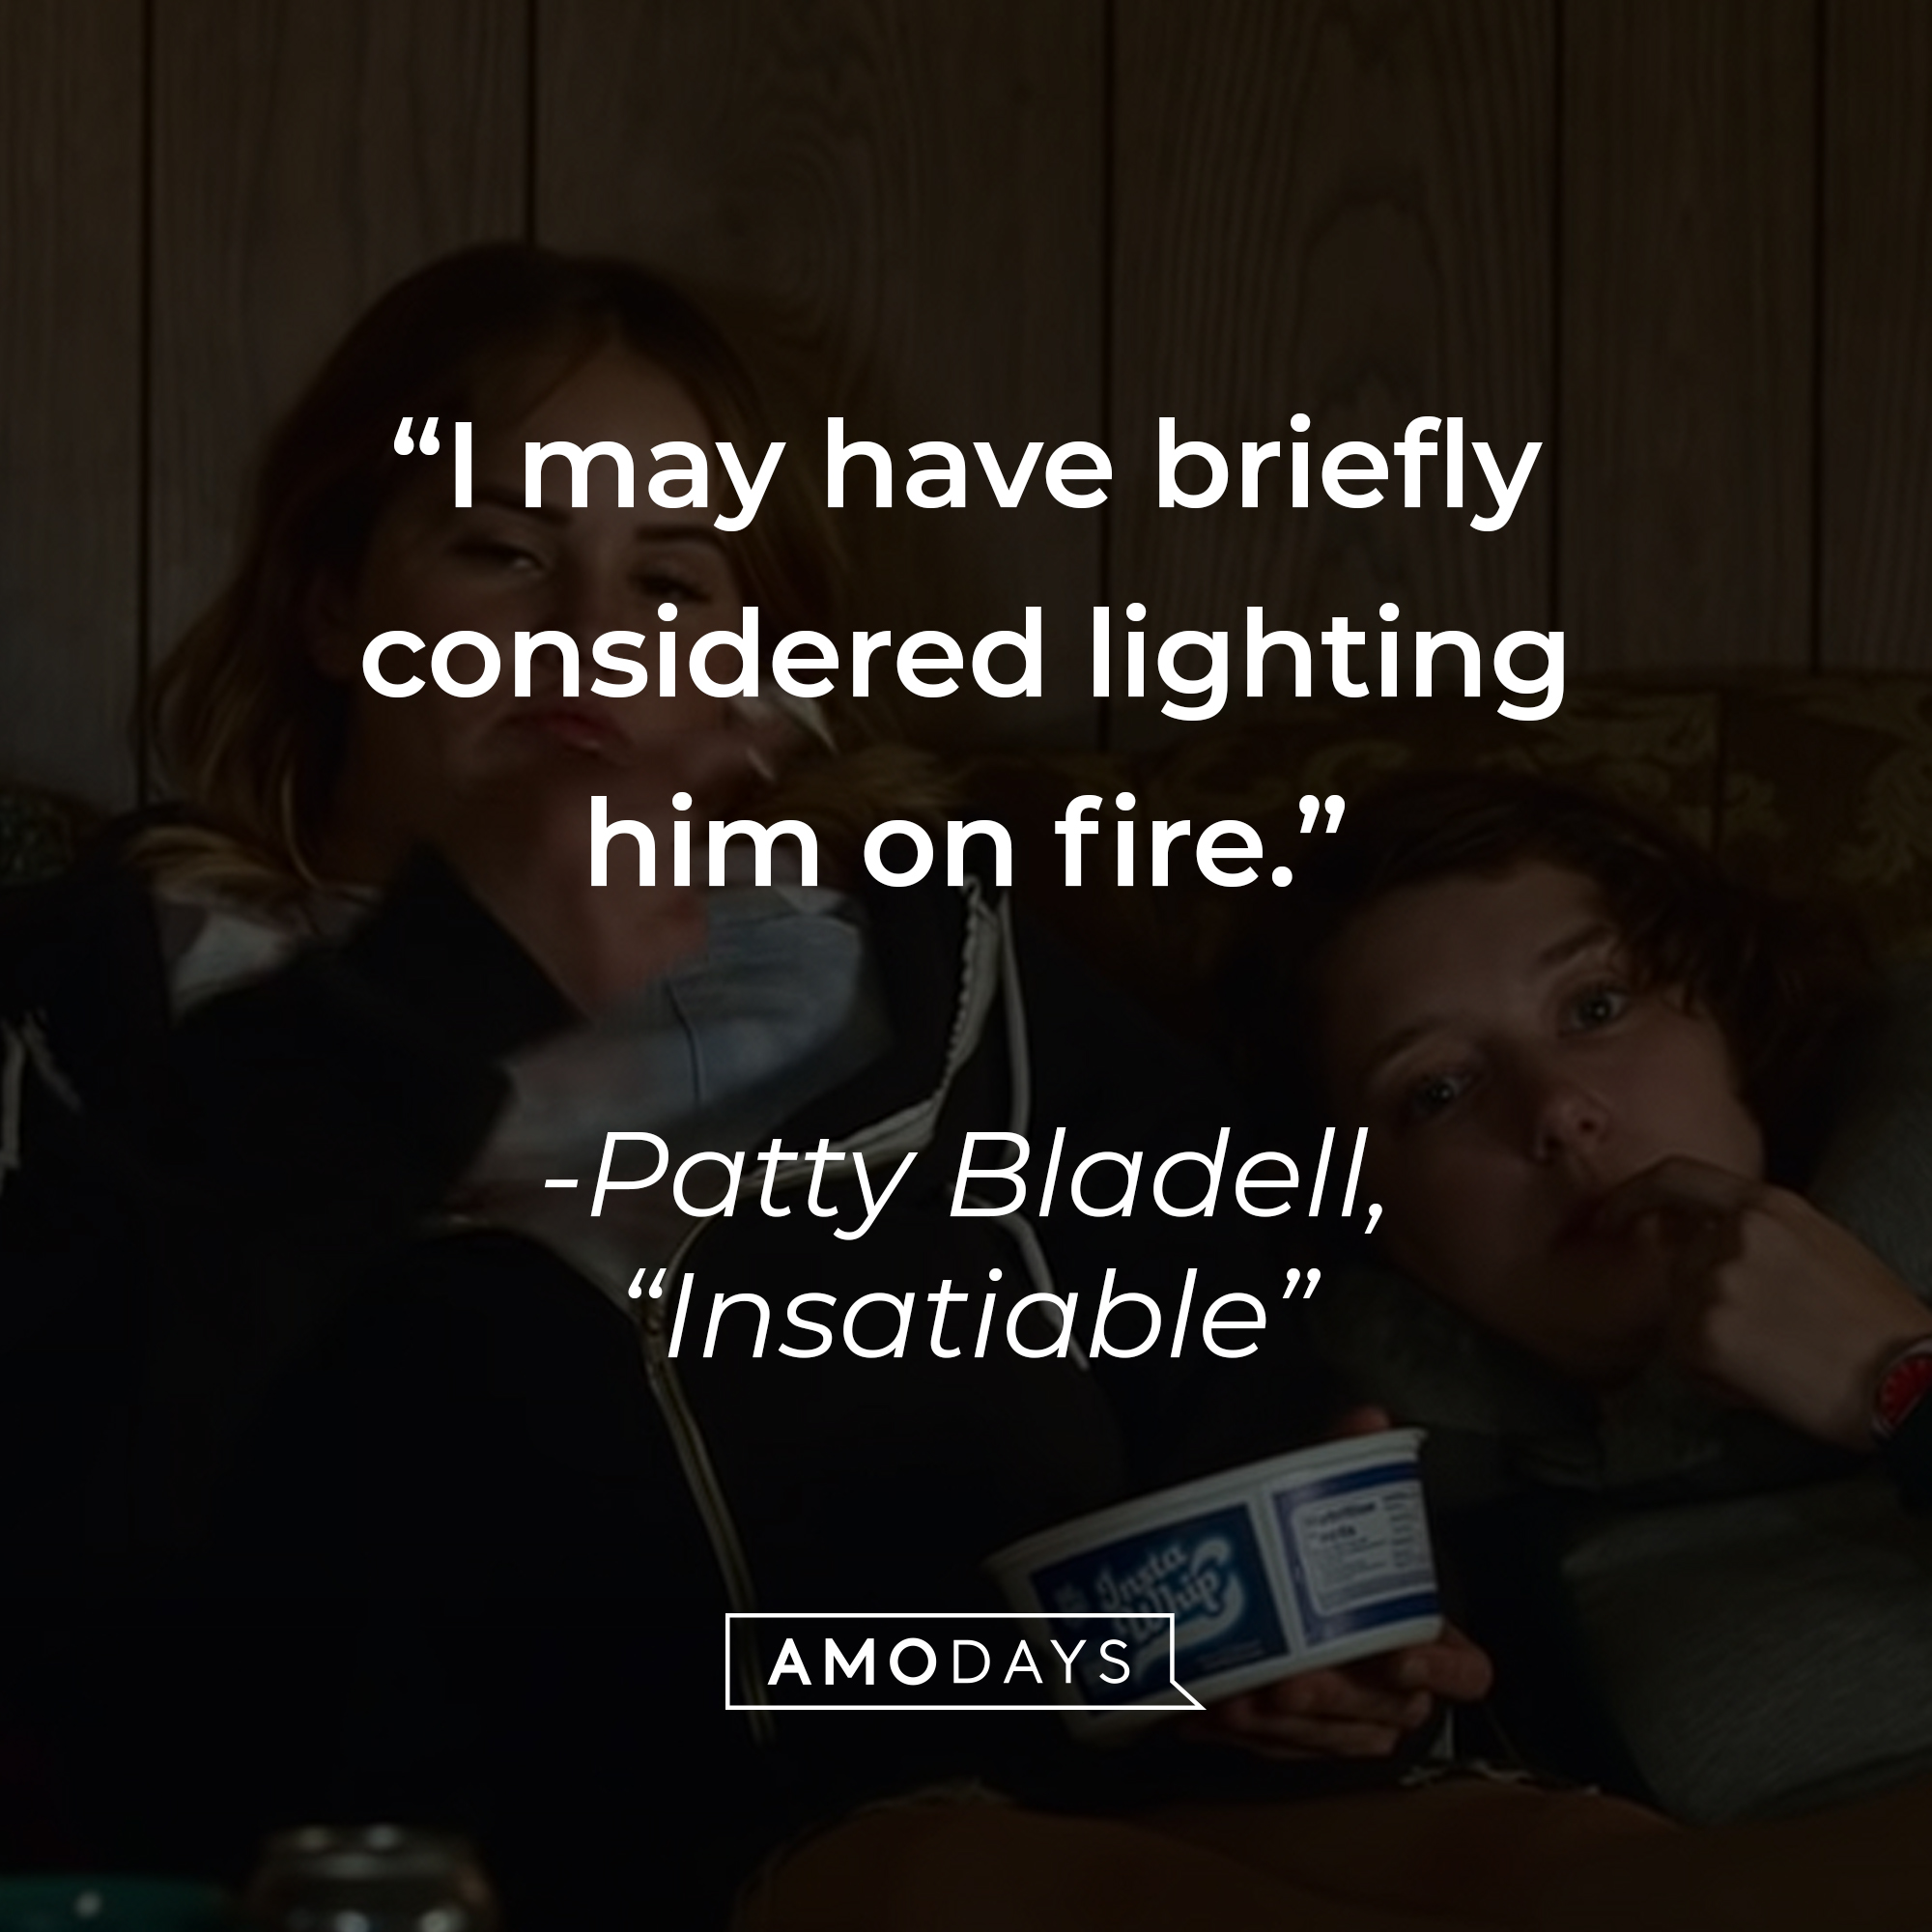 Patty Bladell with her quote on "Insatiable:" “I may have briefly considered lighting him on fire." | Source: Youtube.com/Netflix